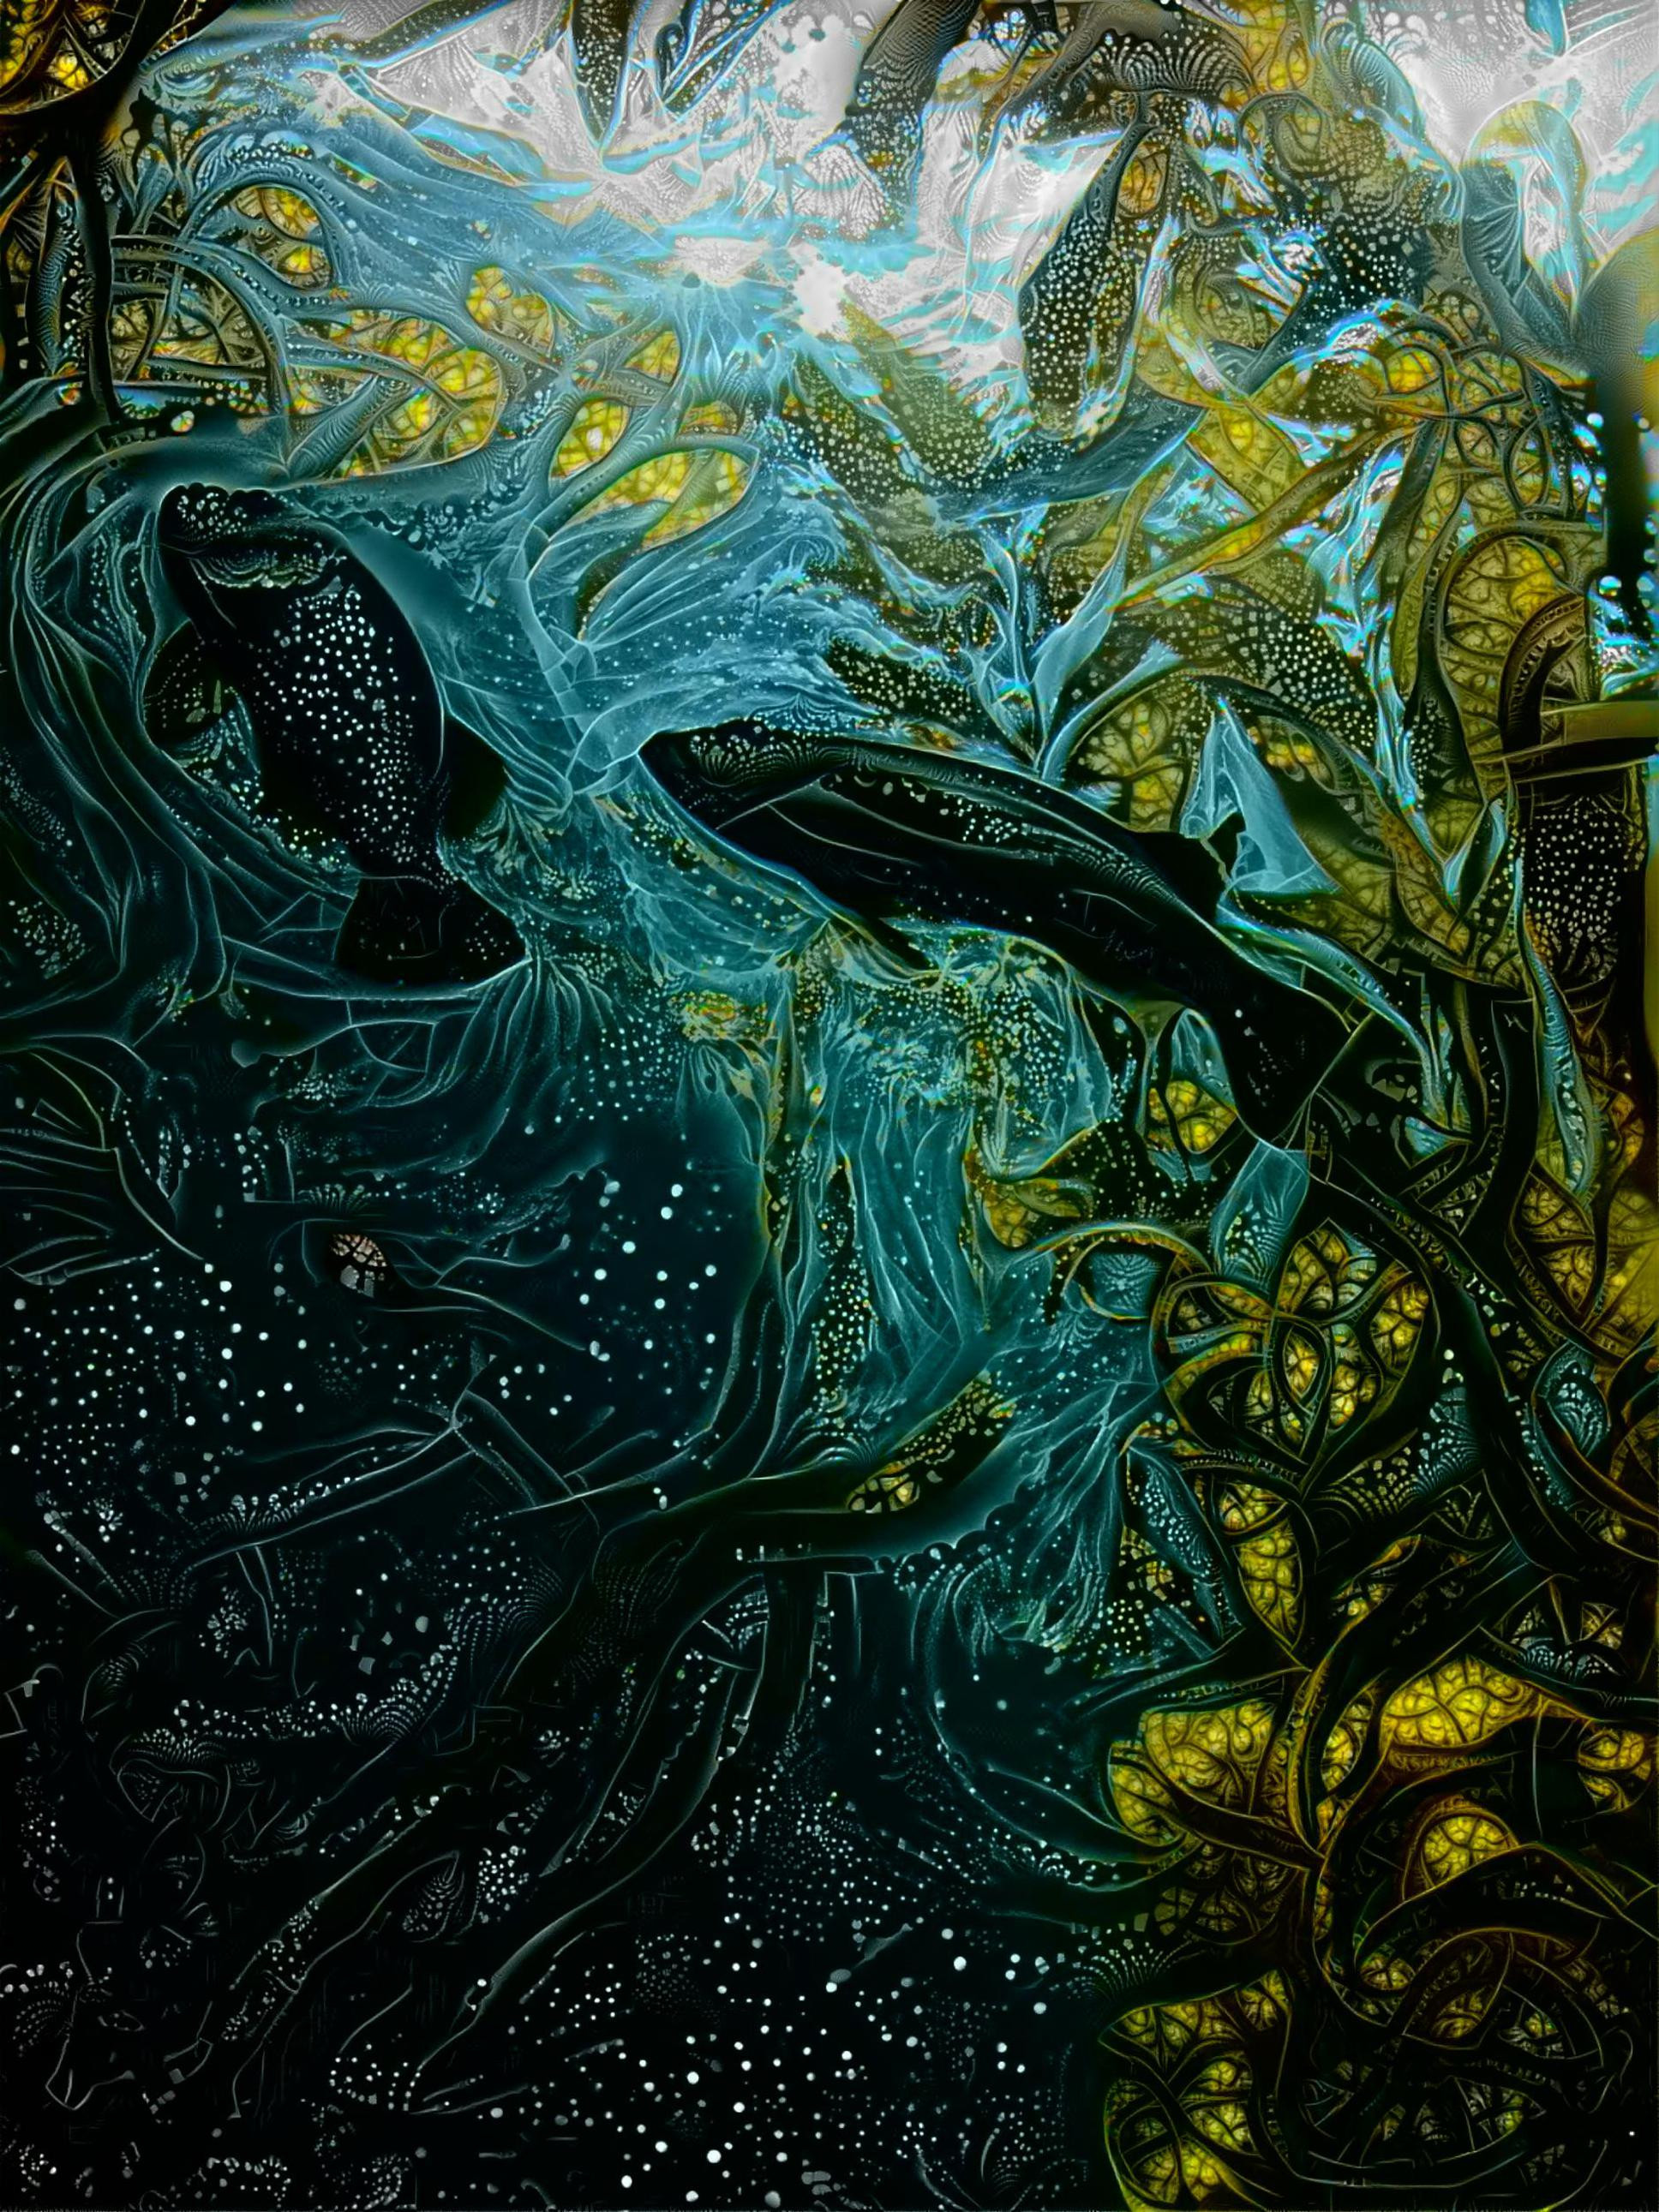 In The Kelp Forest